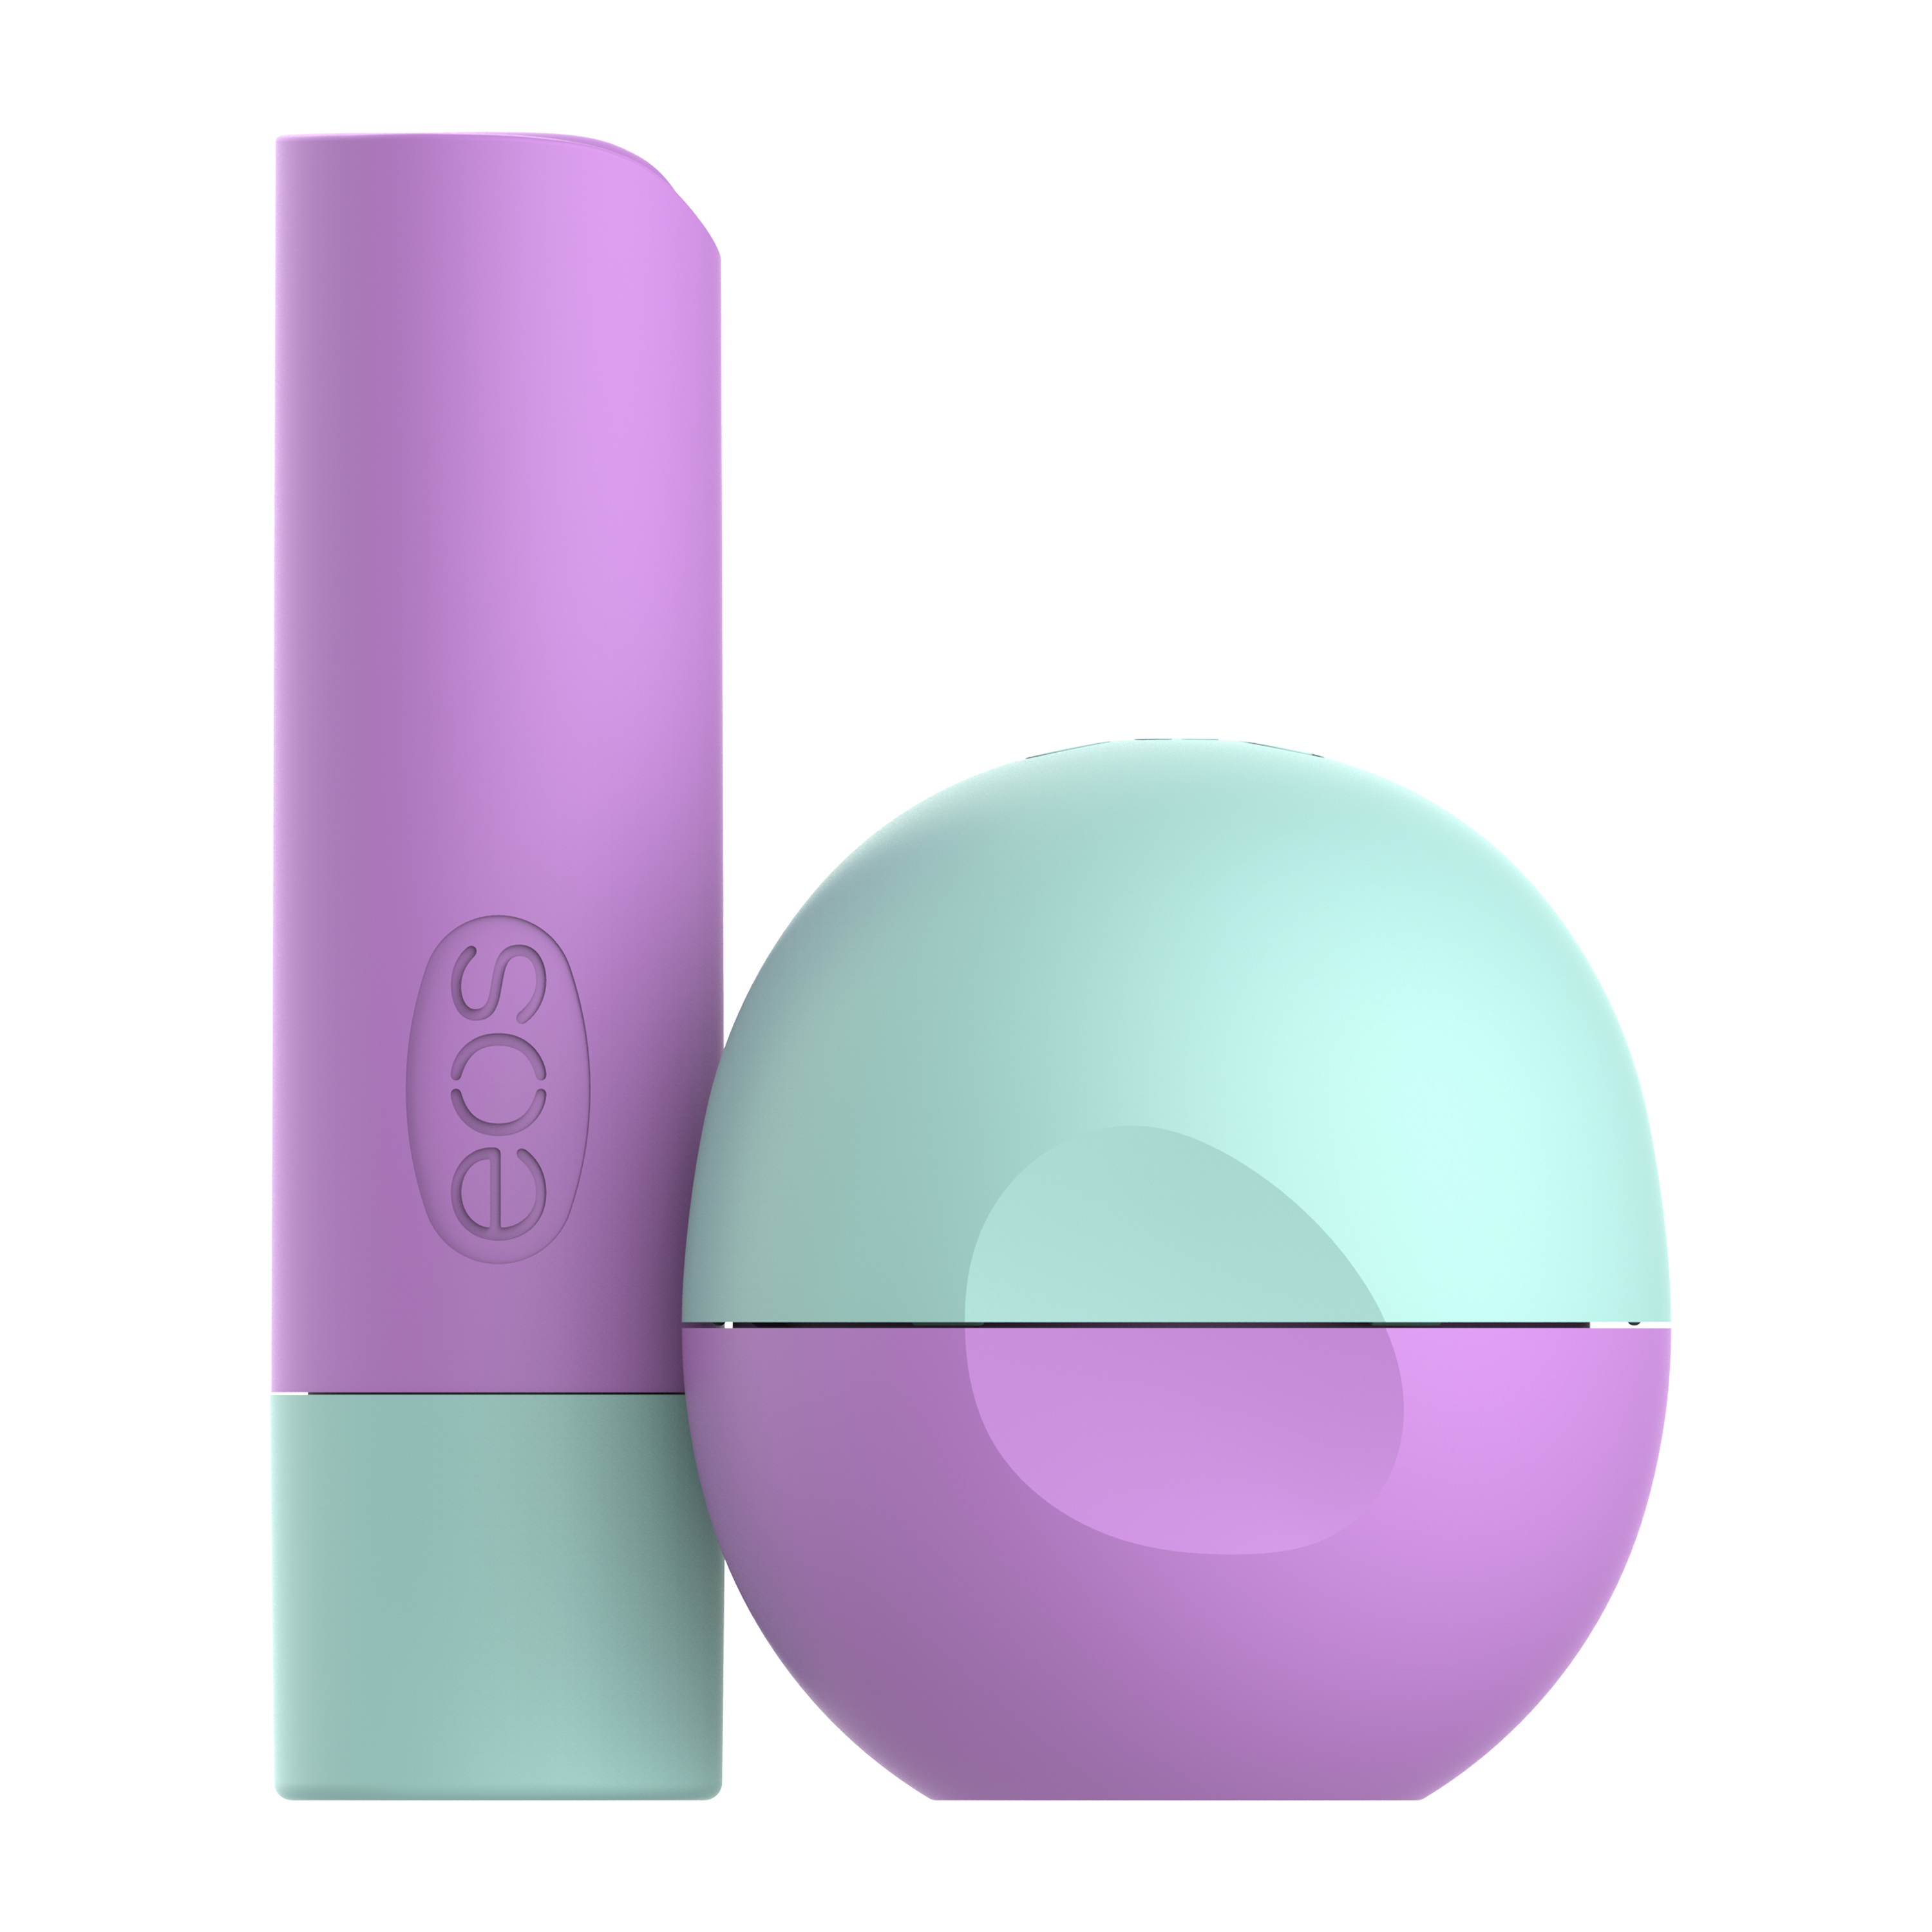 eos flavorlab Stick & Sphere Lip Balm - Eucalyptus , Moisuturzing Shea Butter for Chapped Lips , 0.39 oz , 2 count - image 2 of 7